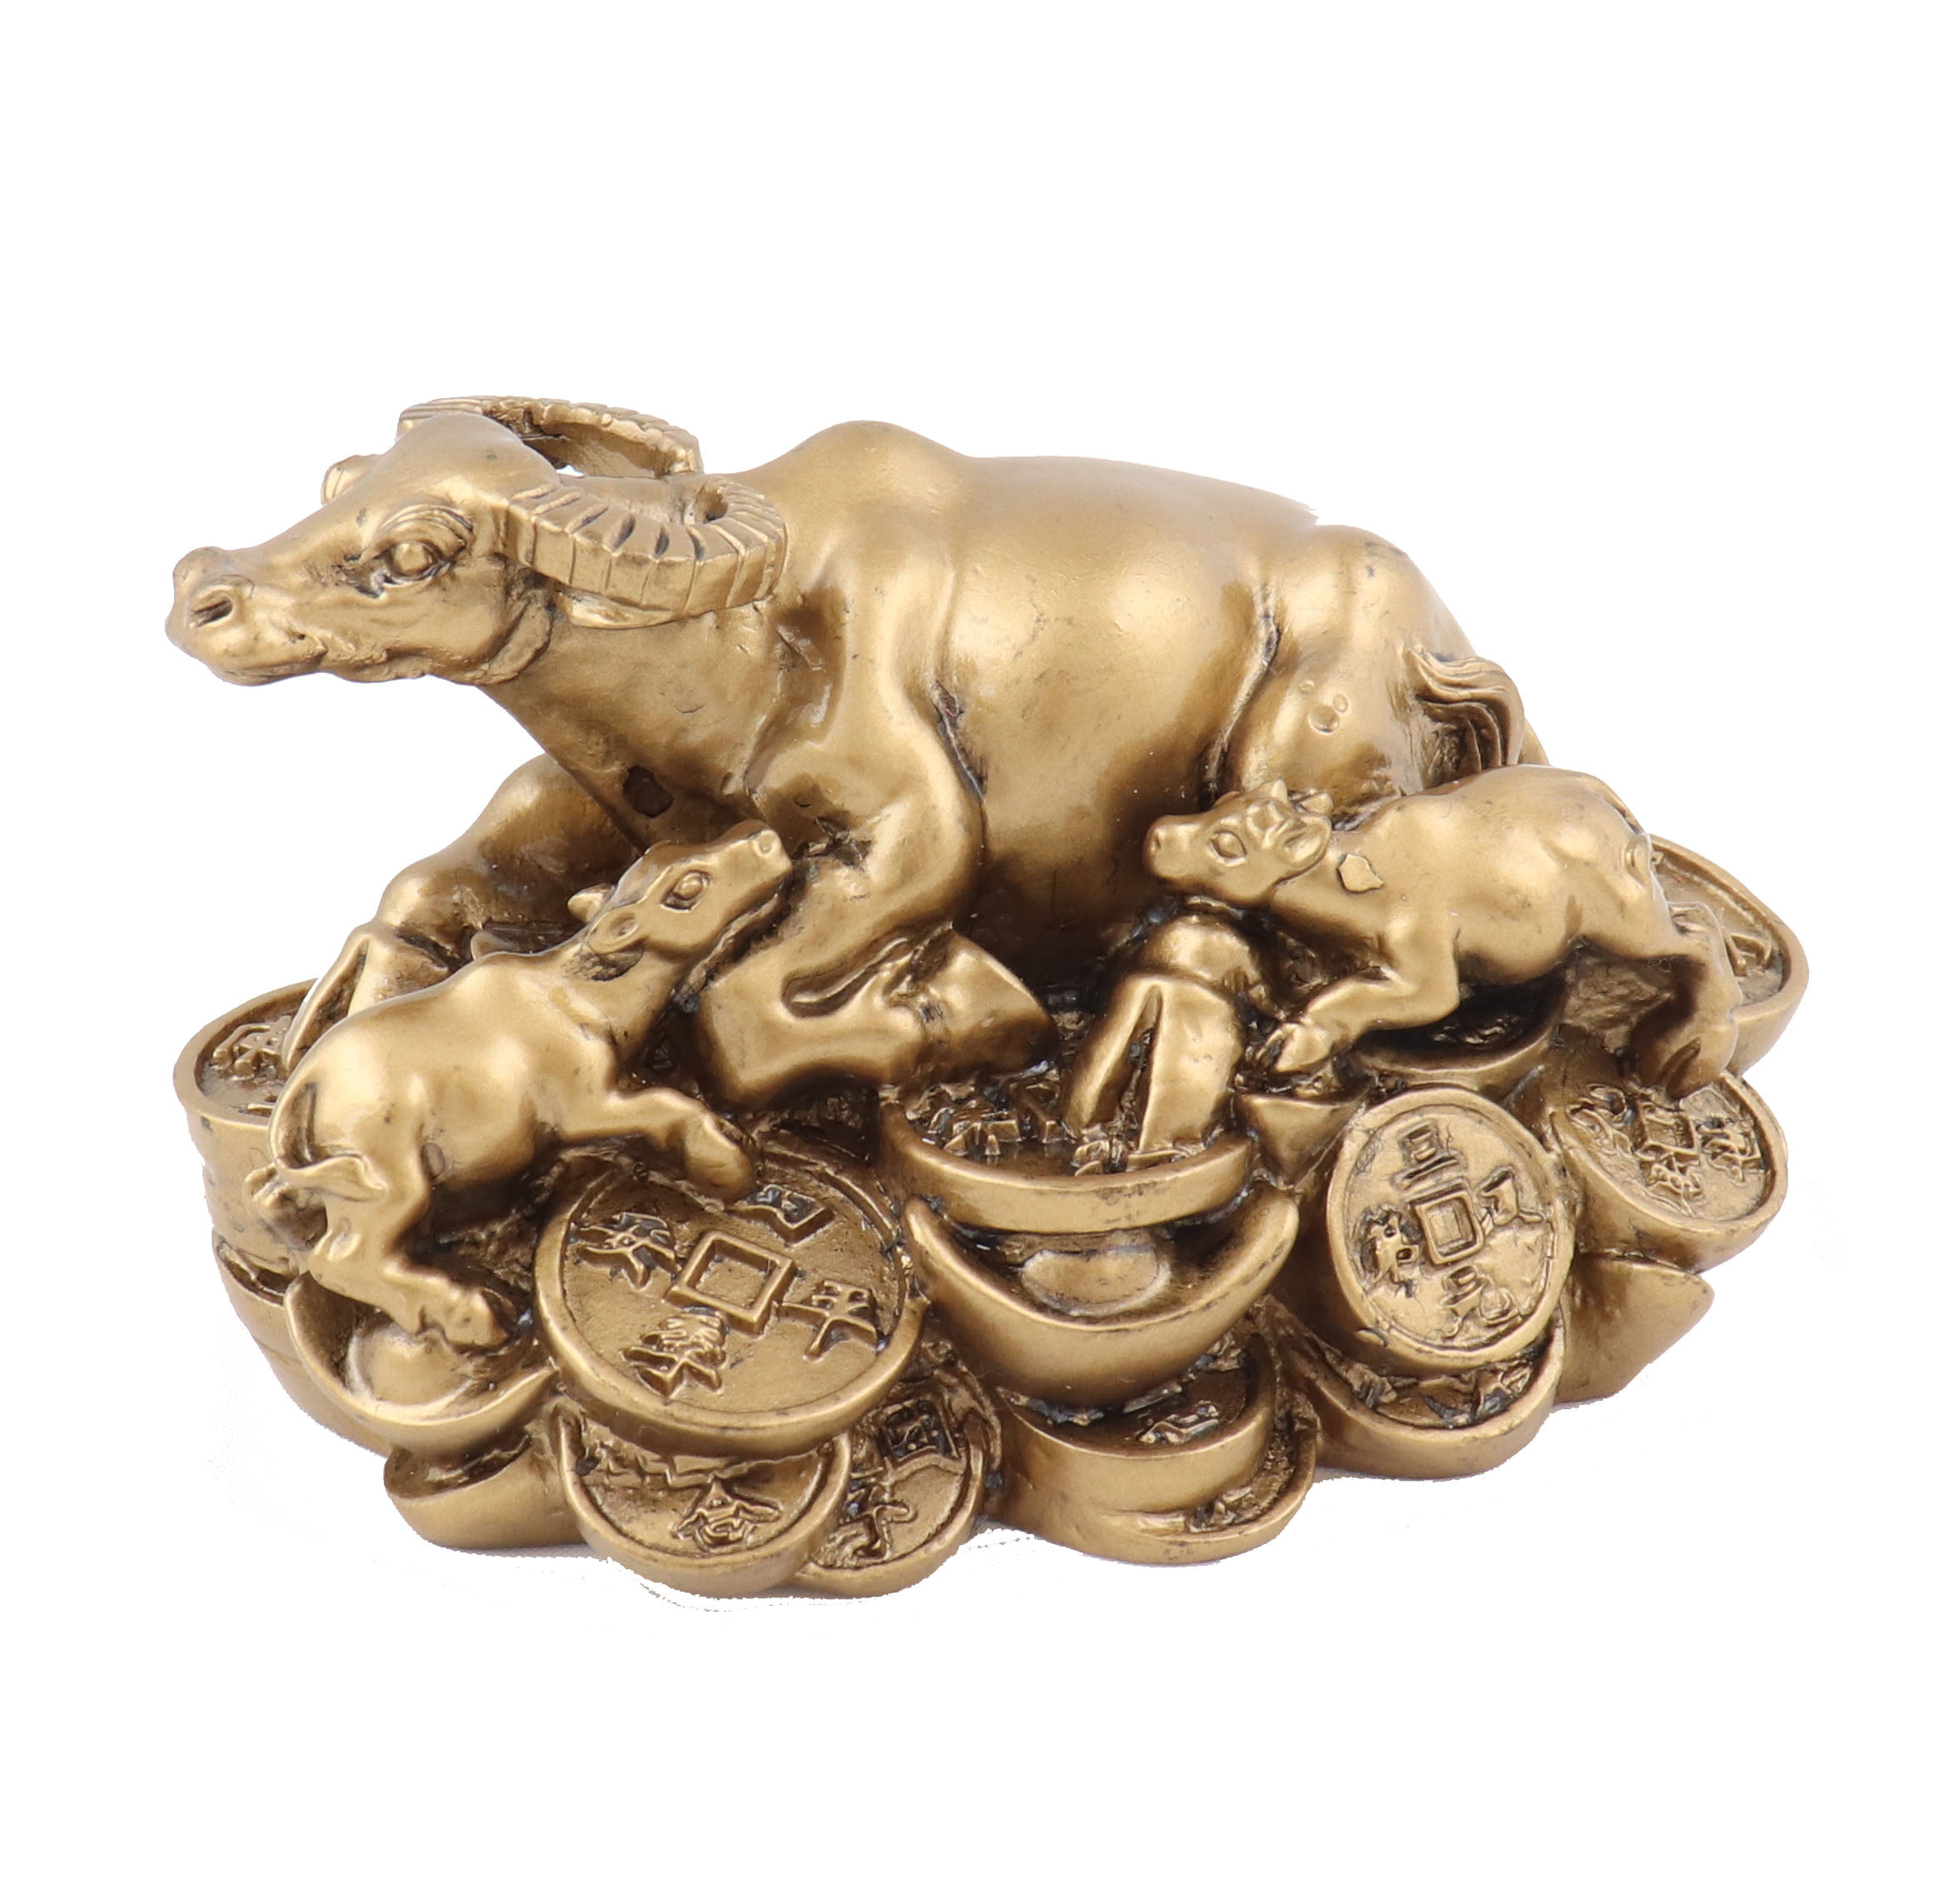 Golden Ox Statue on Big Ingot for the Year of the Ox 2021 